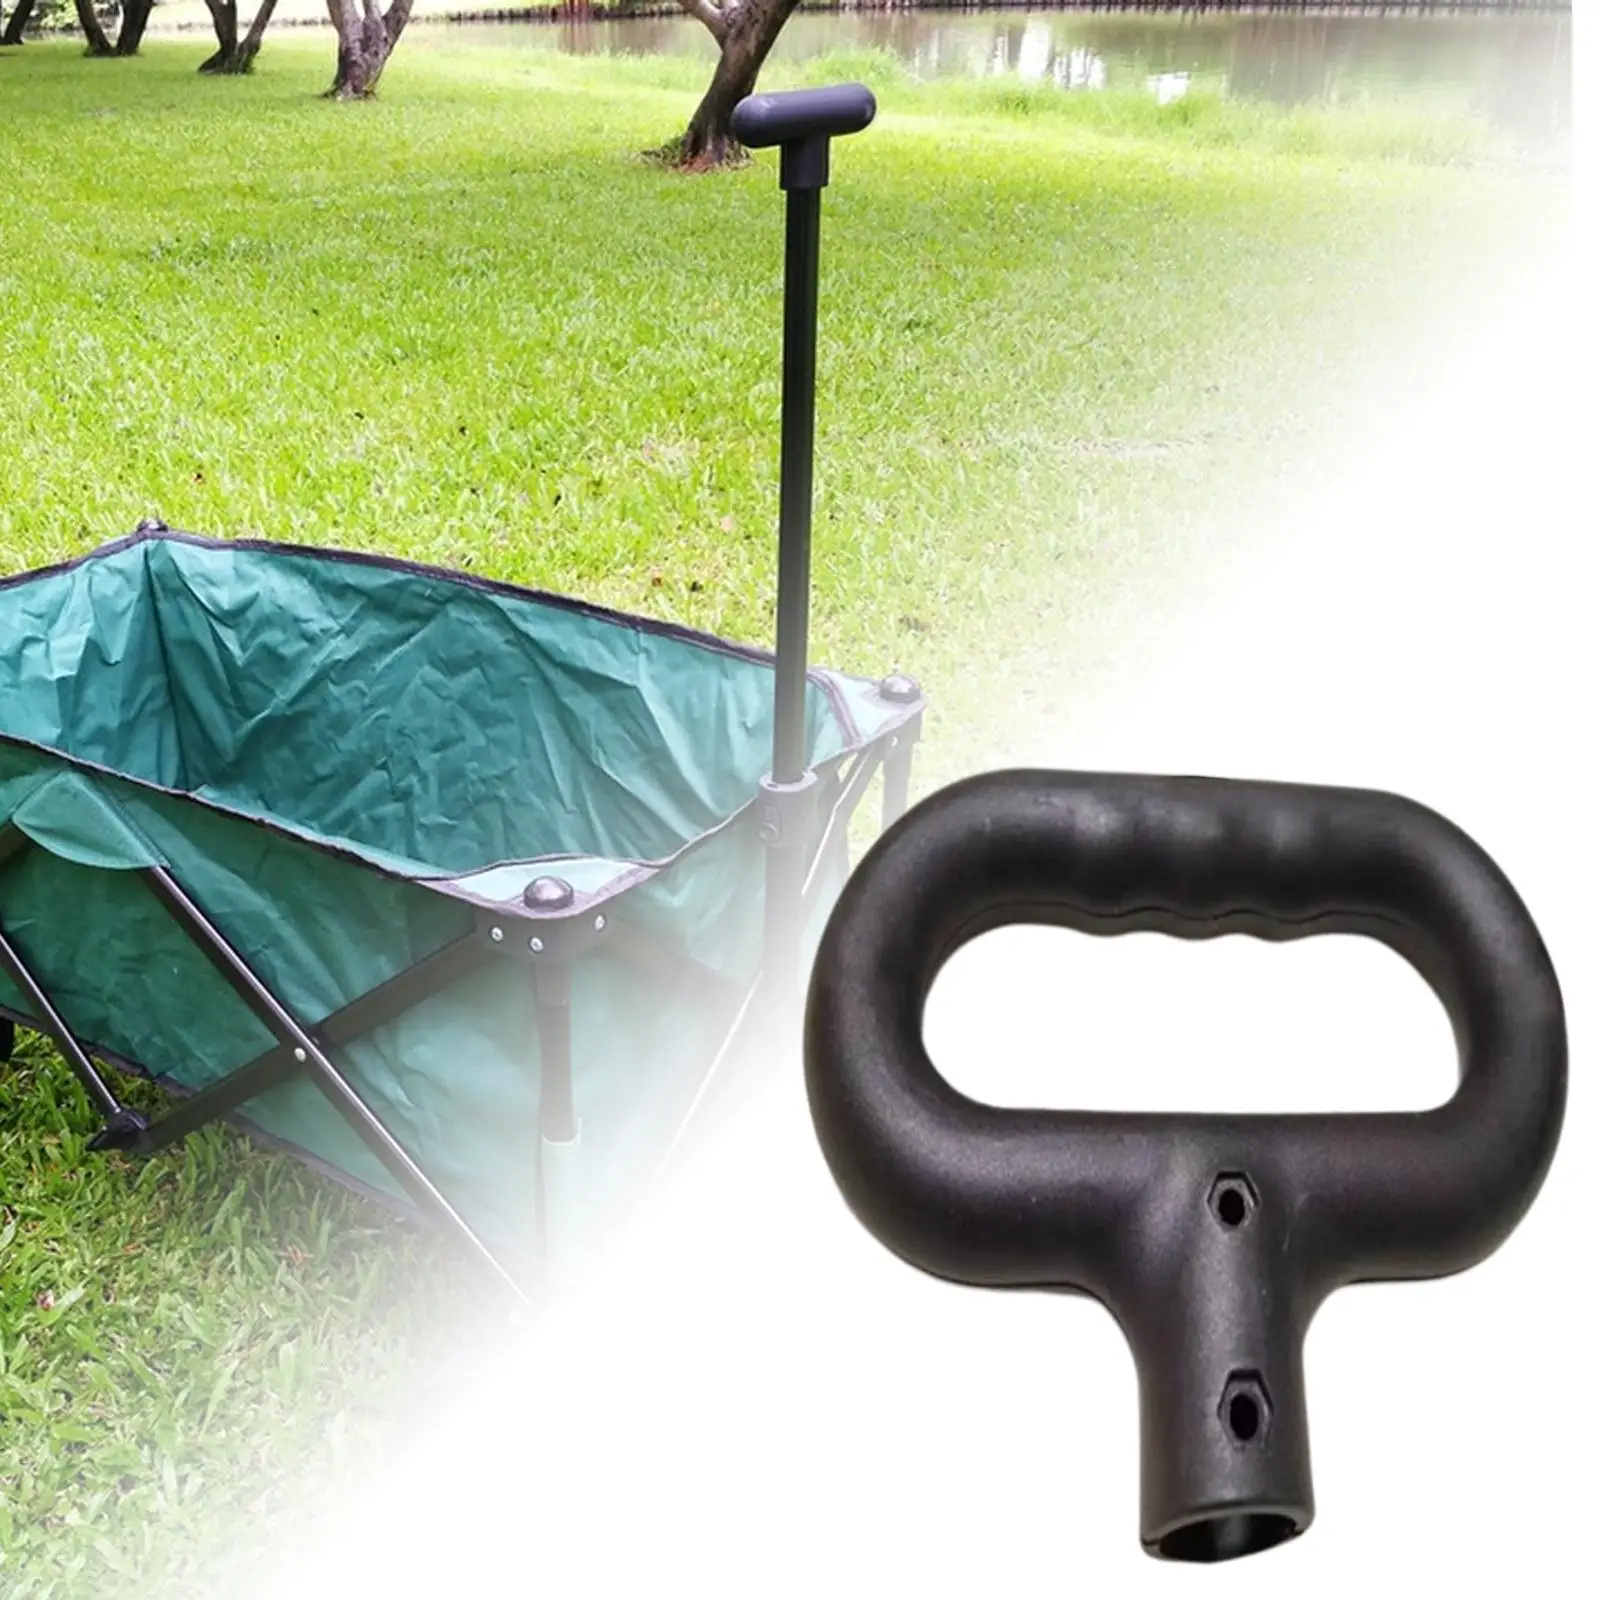 Wagon Cart Push Handle Portable Trolley Handle for Camping Wagon Collapsible Wagon Cart Shopping Cart Attachment Accessories